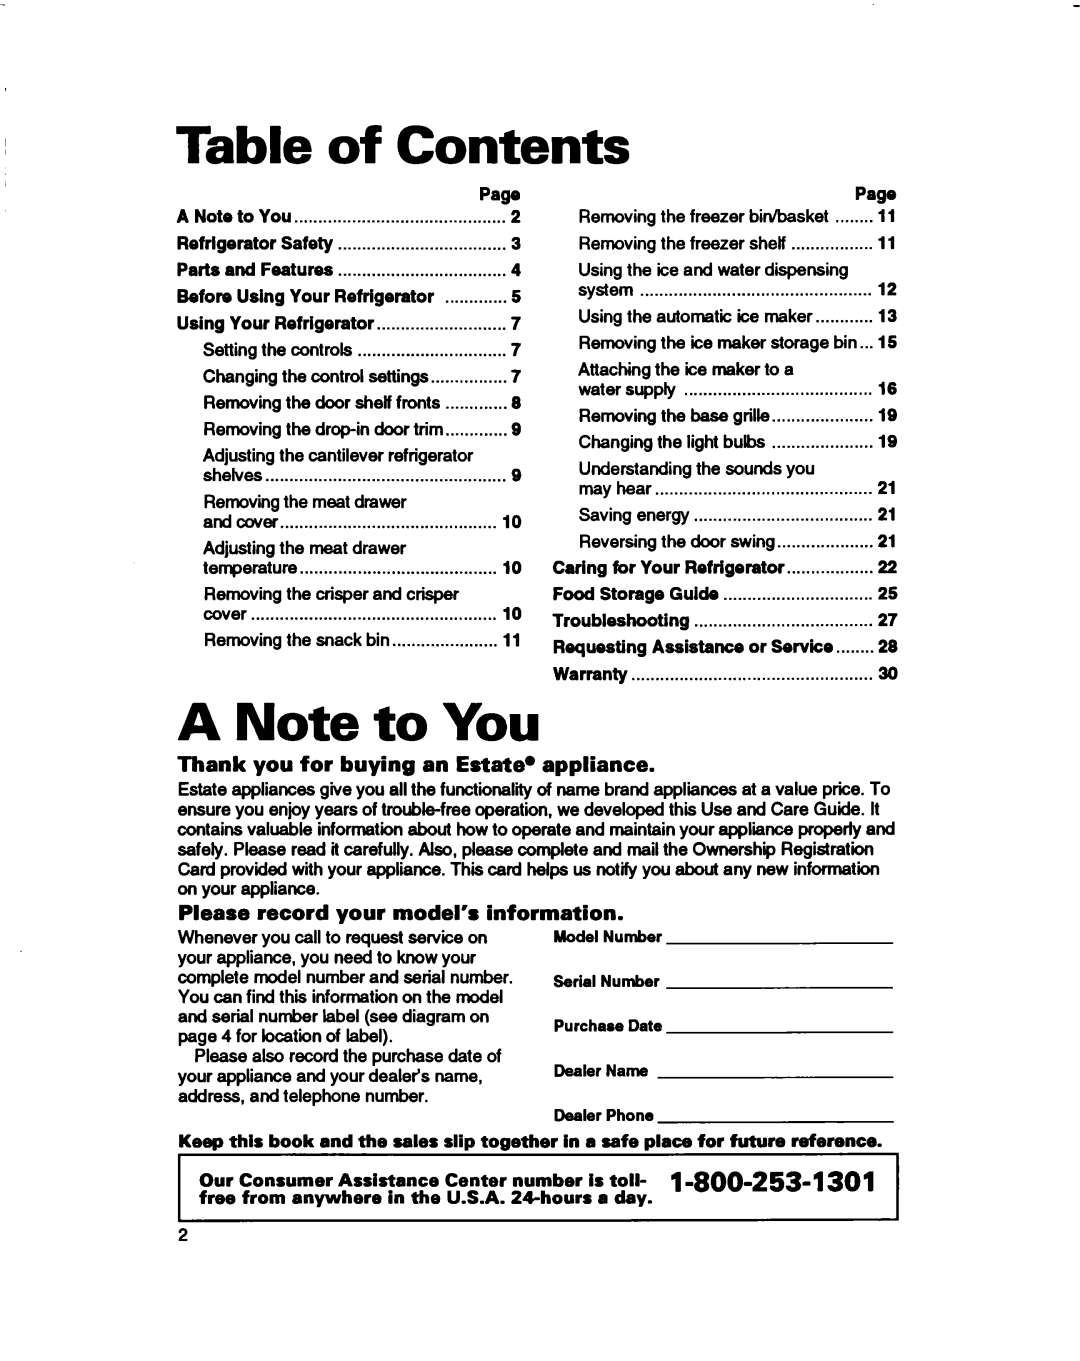 Estate 2173445 warranty Table, Contents, A Note to You, Thank you for buying an Estate. appliance 